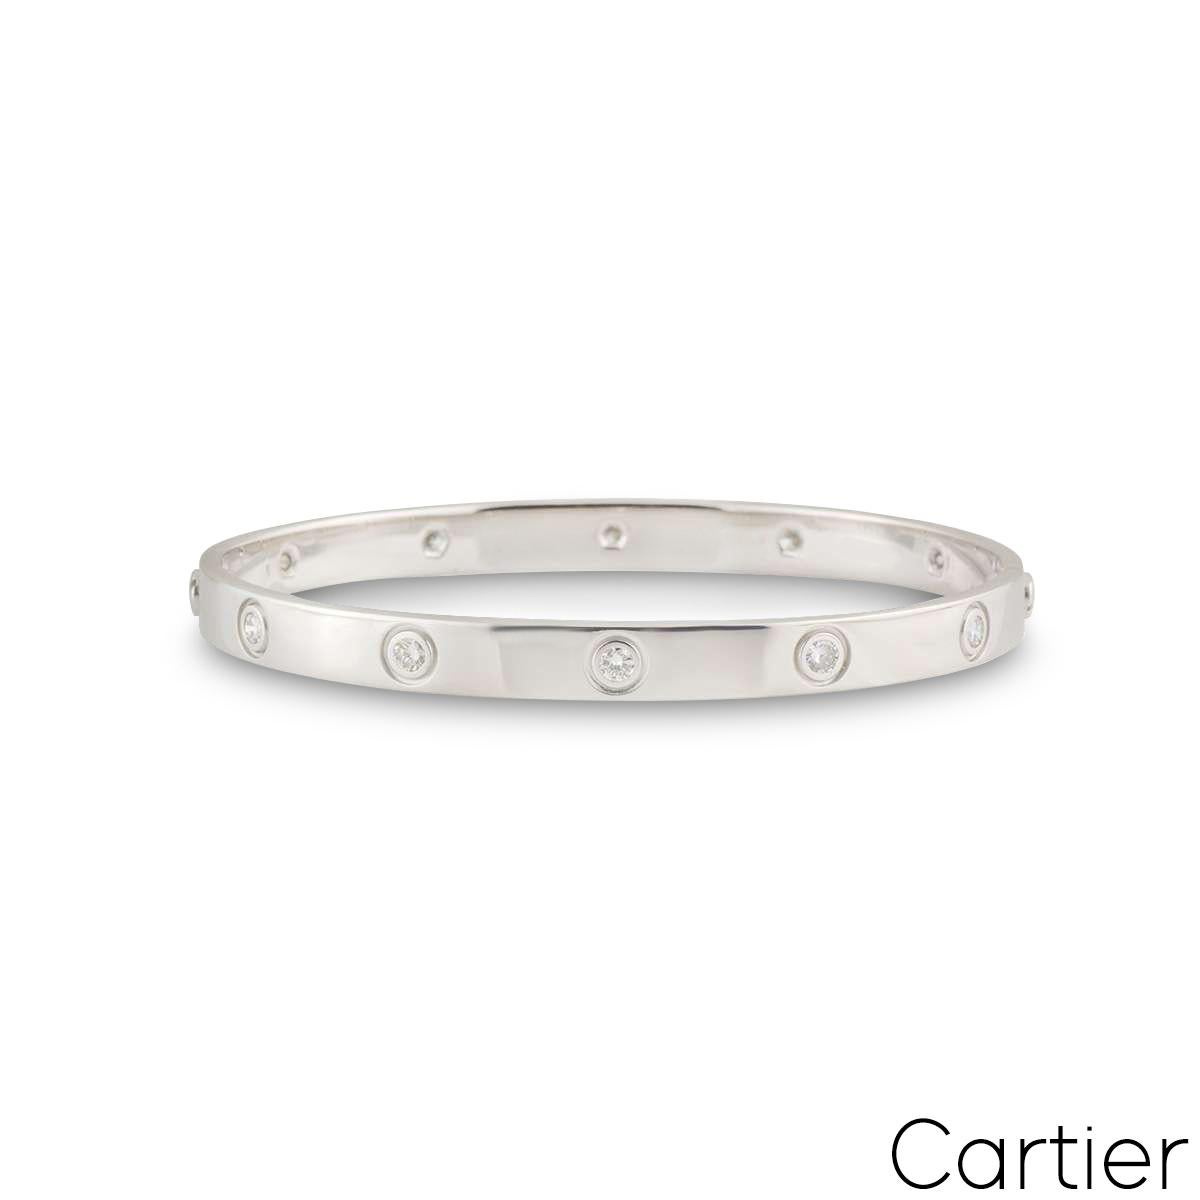 An 18k white gold full diamond Cartier bracelet from the Love collection. The bracelet is set with 10 round brilliant cut diamonds circulating the outer edge throughout in a rubover setting. The bracelet is size 19 and features the old style screw